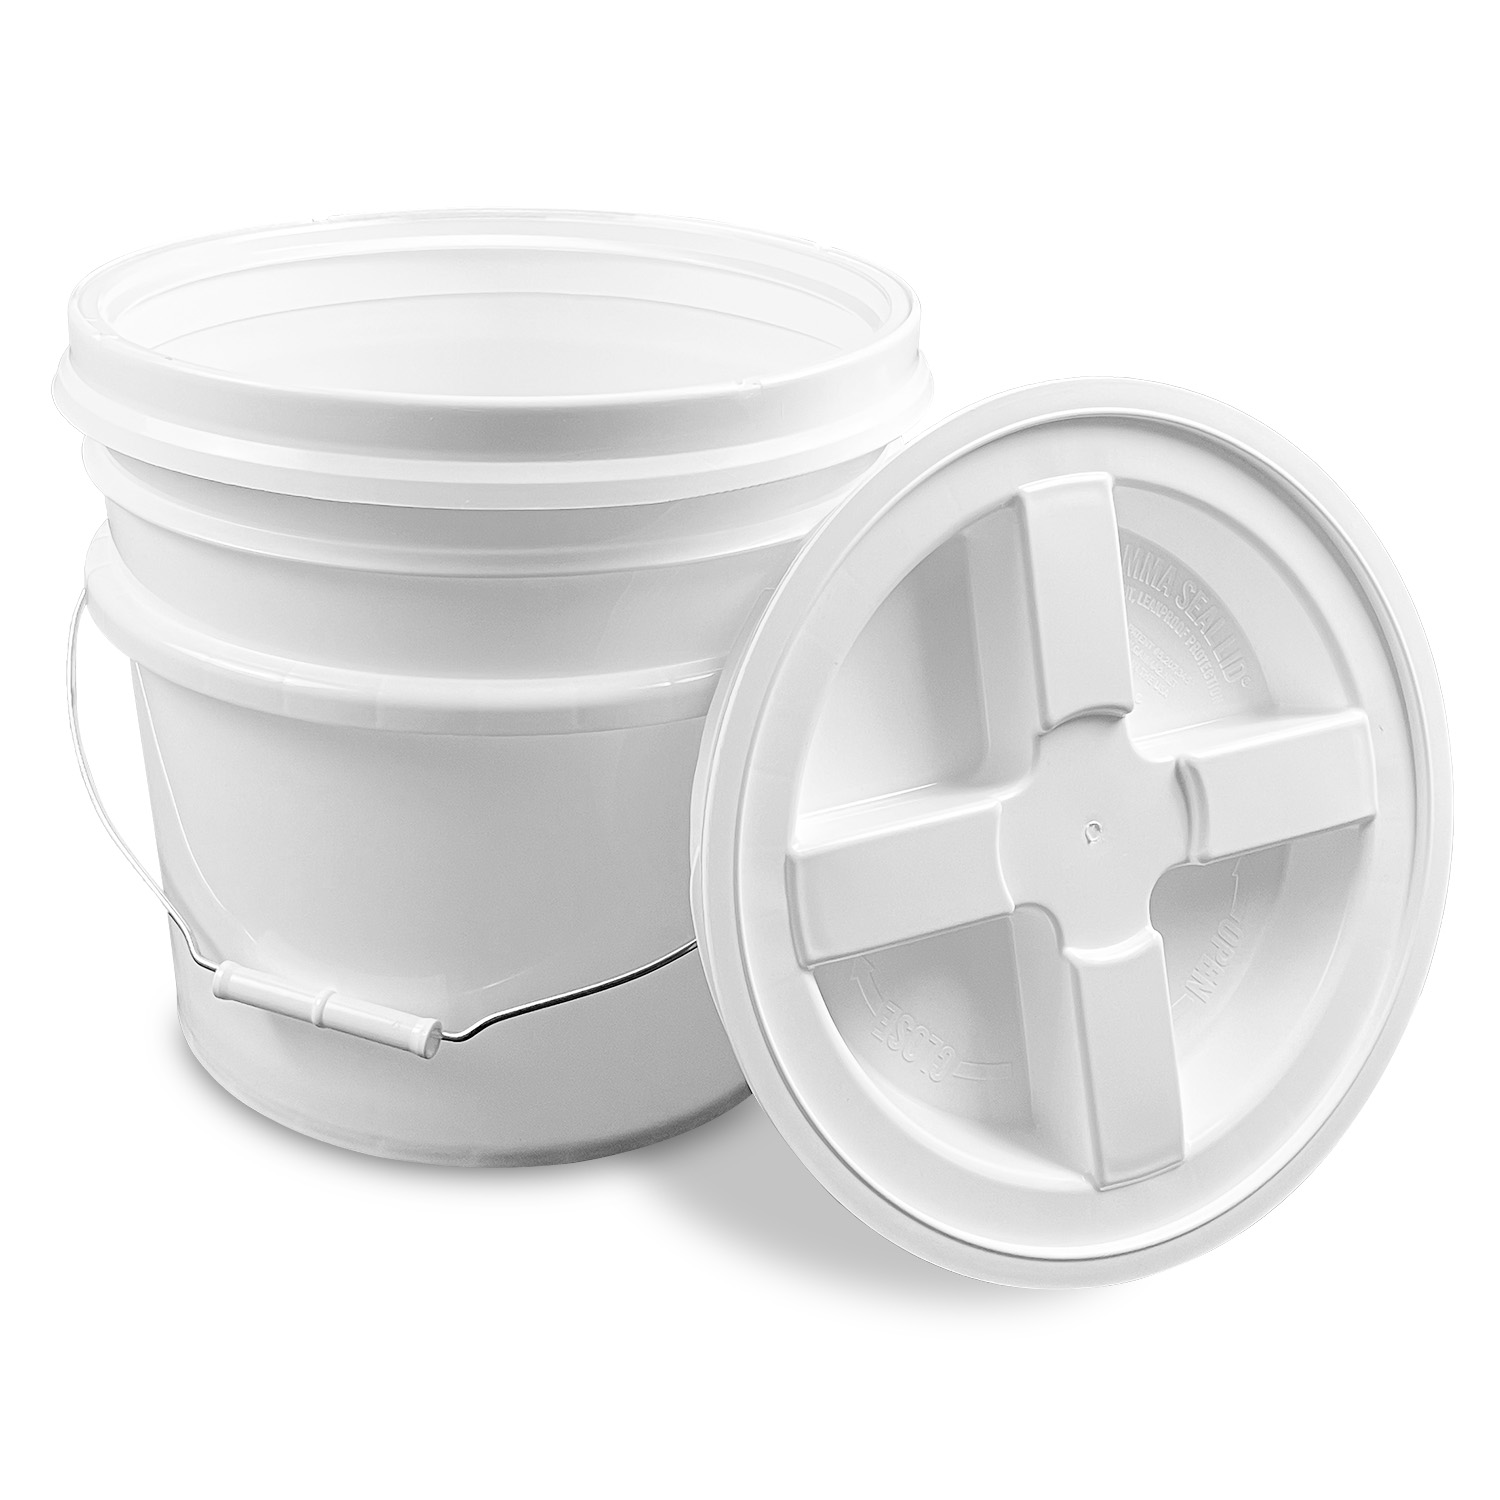 5 gal. BPA Free Food Grade Bucket with Wire Handle and Lid (T40MW